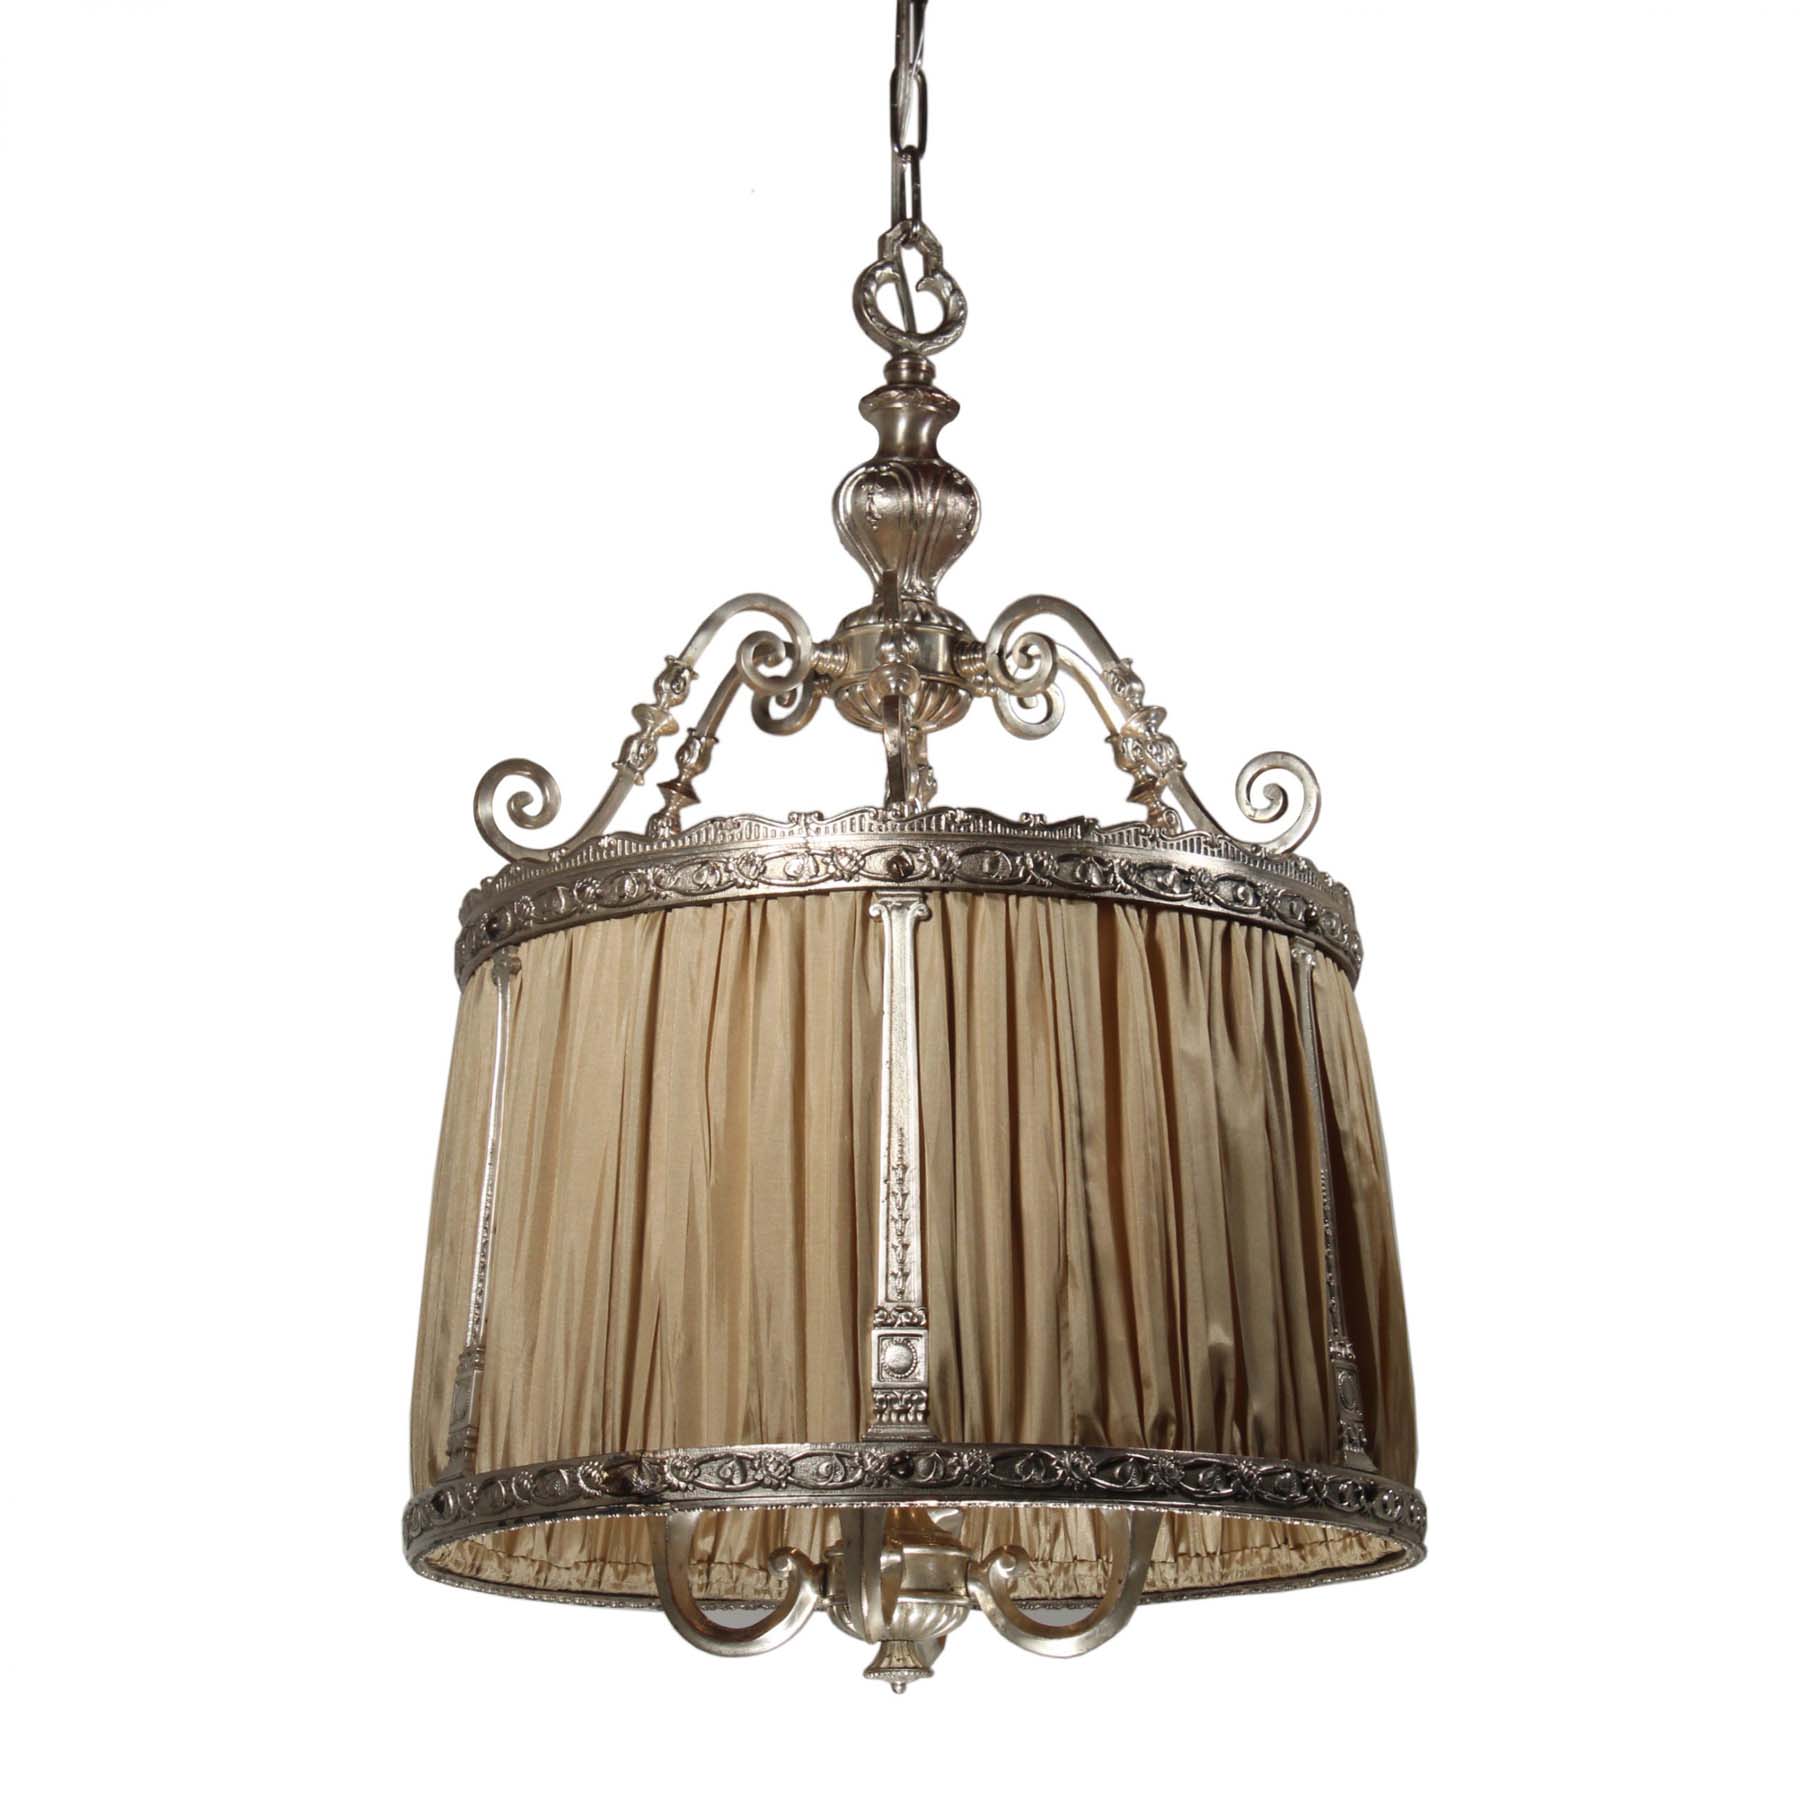 SOLD Antique Neoclassical Pendant Light, Silver Plate-0